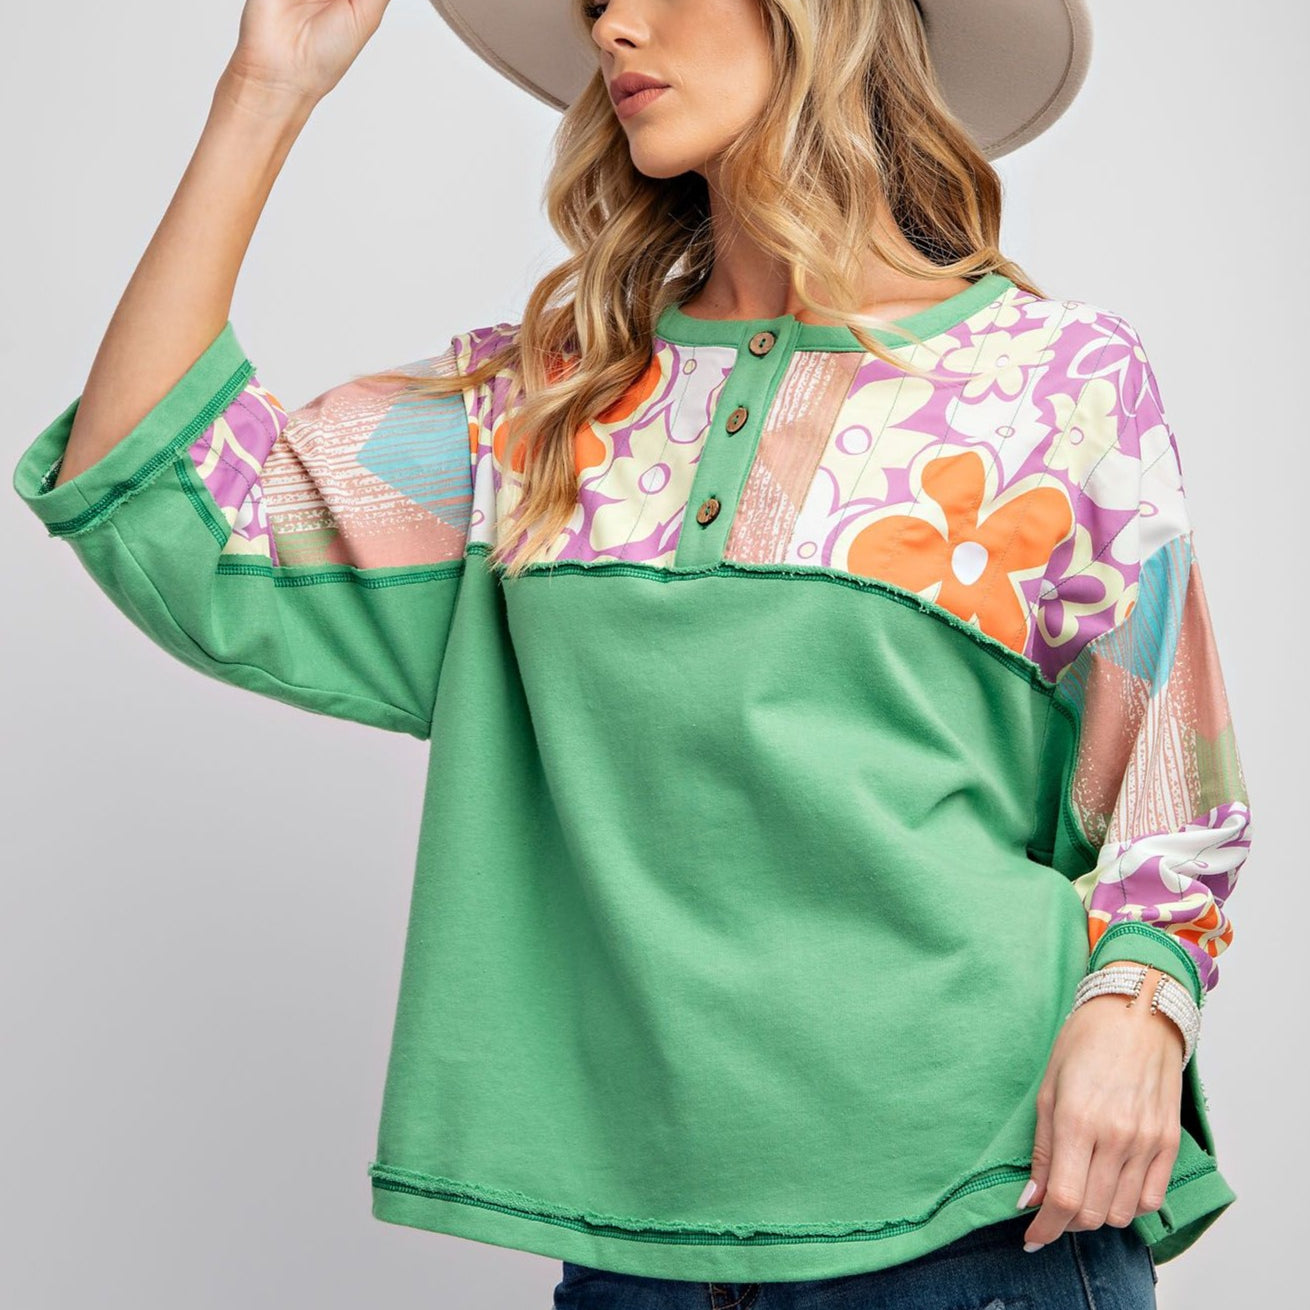 Flower Power Terry Knit Henley Top by Easel - Apple Green - Plus-Apparel-Easel-LouisGeorge Boutique, Women’s Fashion Boutique Located in Trussville, Alabama